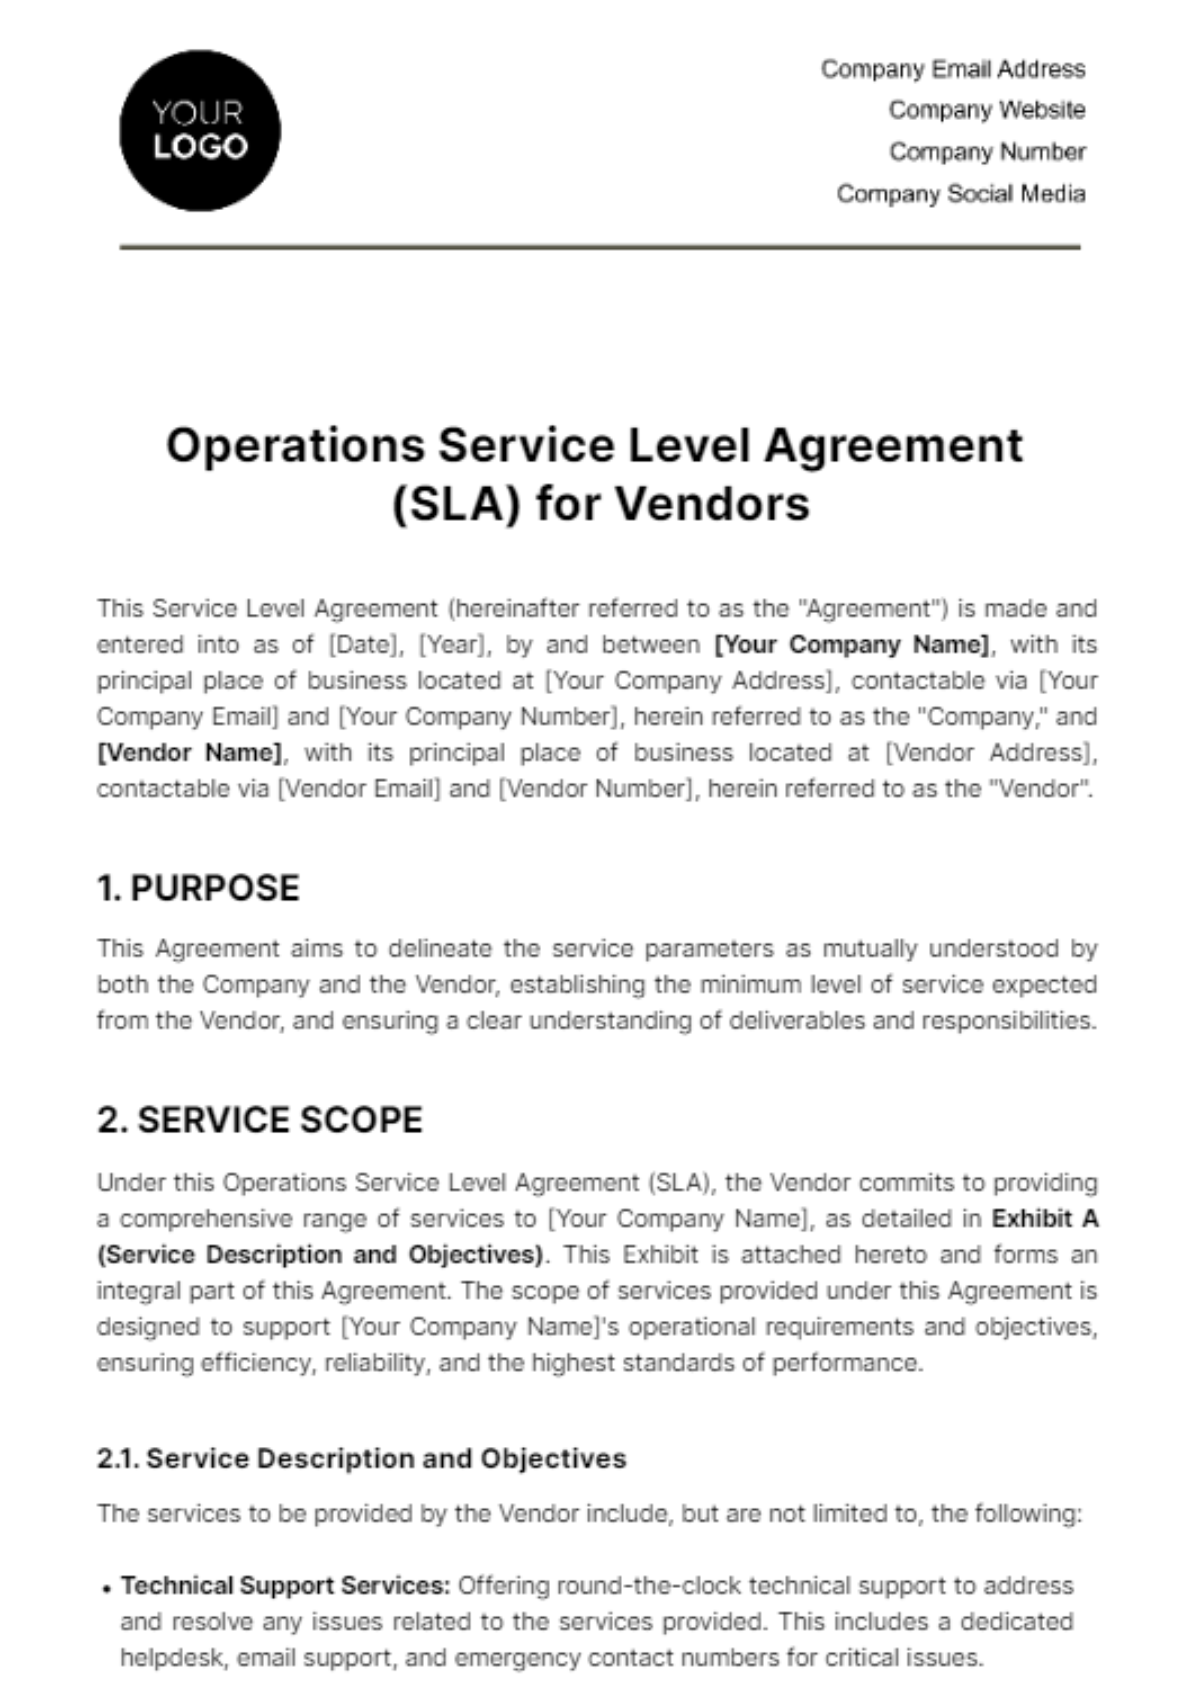 Free Operations Service Level Agreement (SLA) for Vendors Template